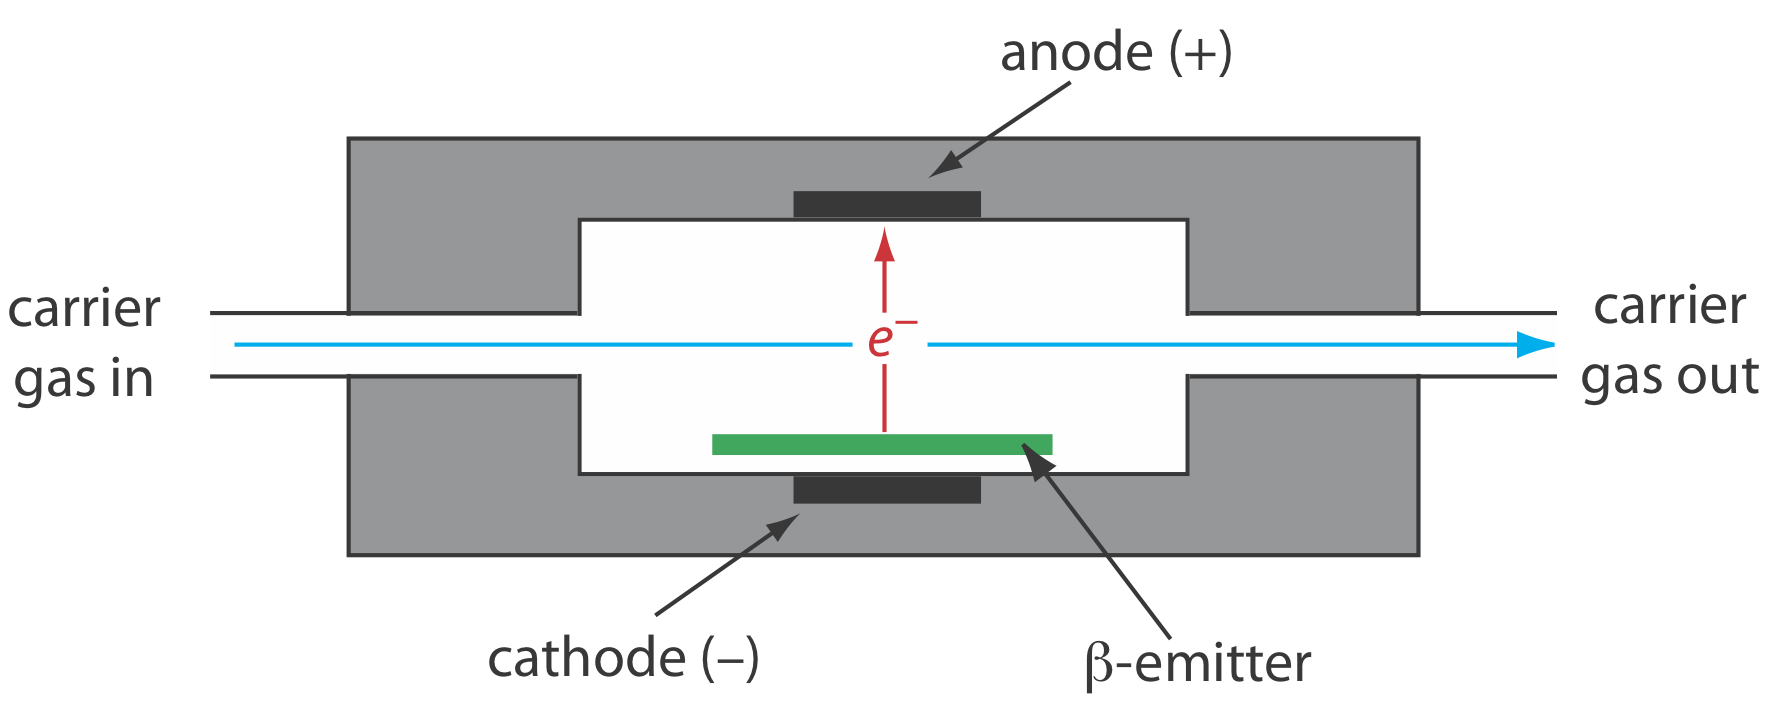 The electron capture detector consists of a one way linear flow of carrier gas in and out, during which it will pass by the anode, cathode, and beta-emitter.